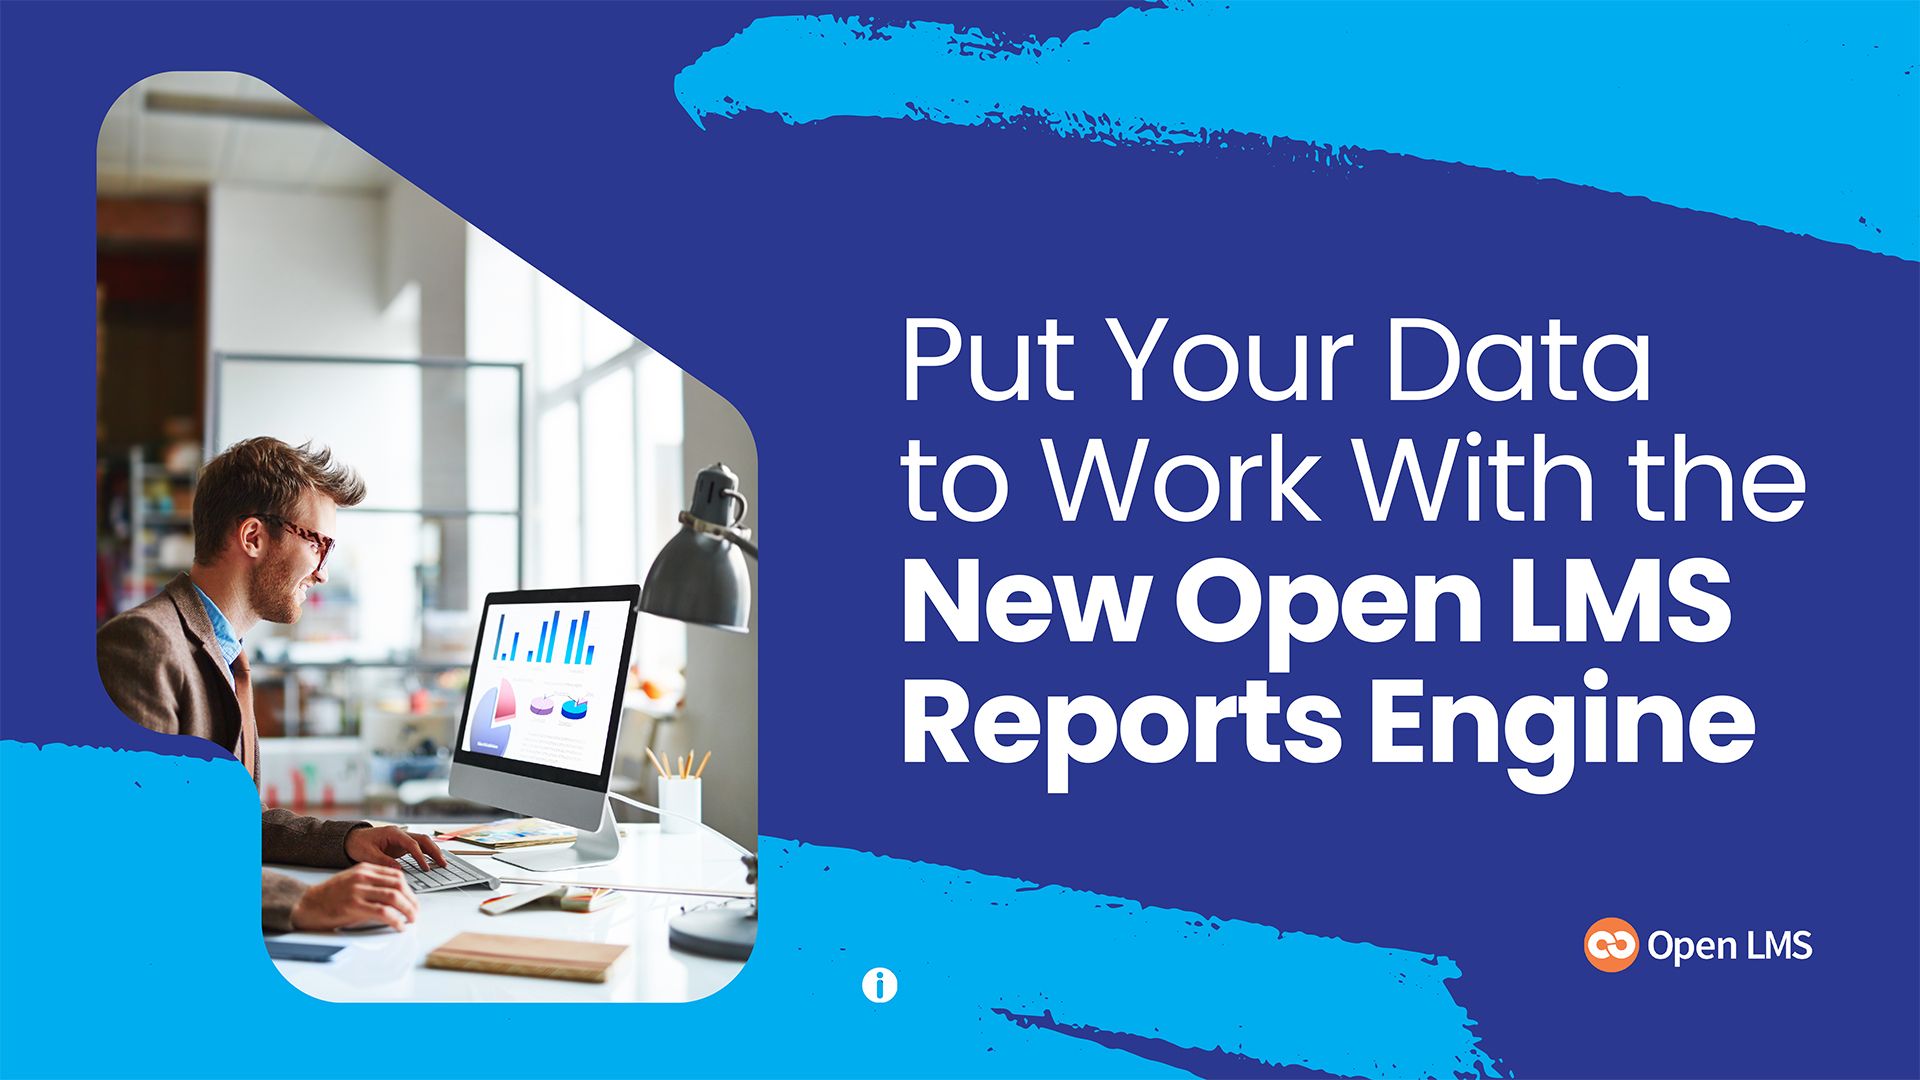 Put Your Data to Work With the New Open LMS Reports Engine